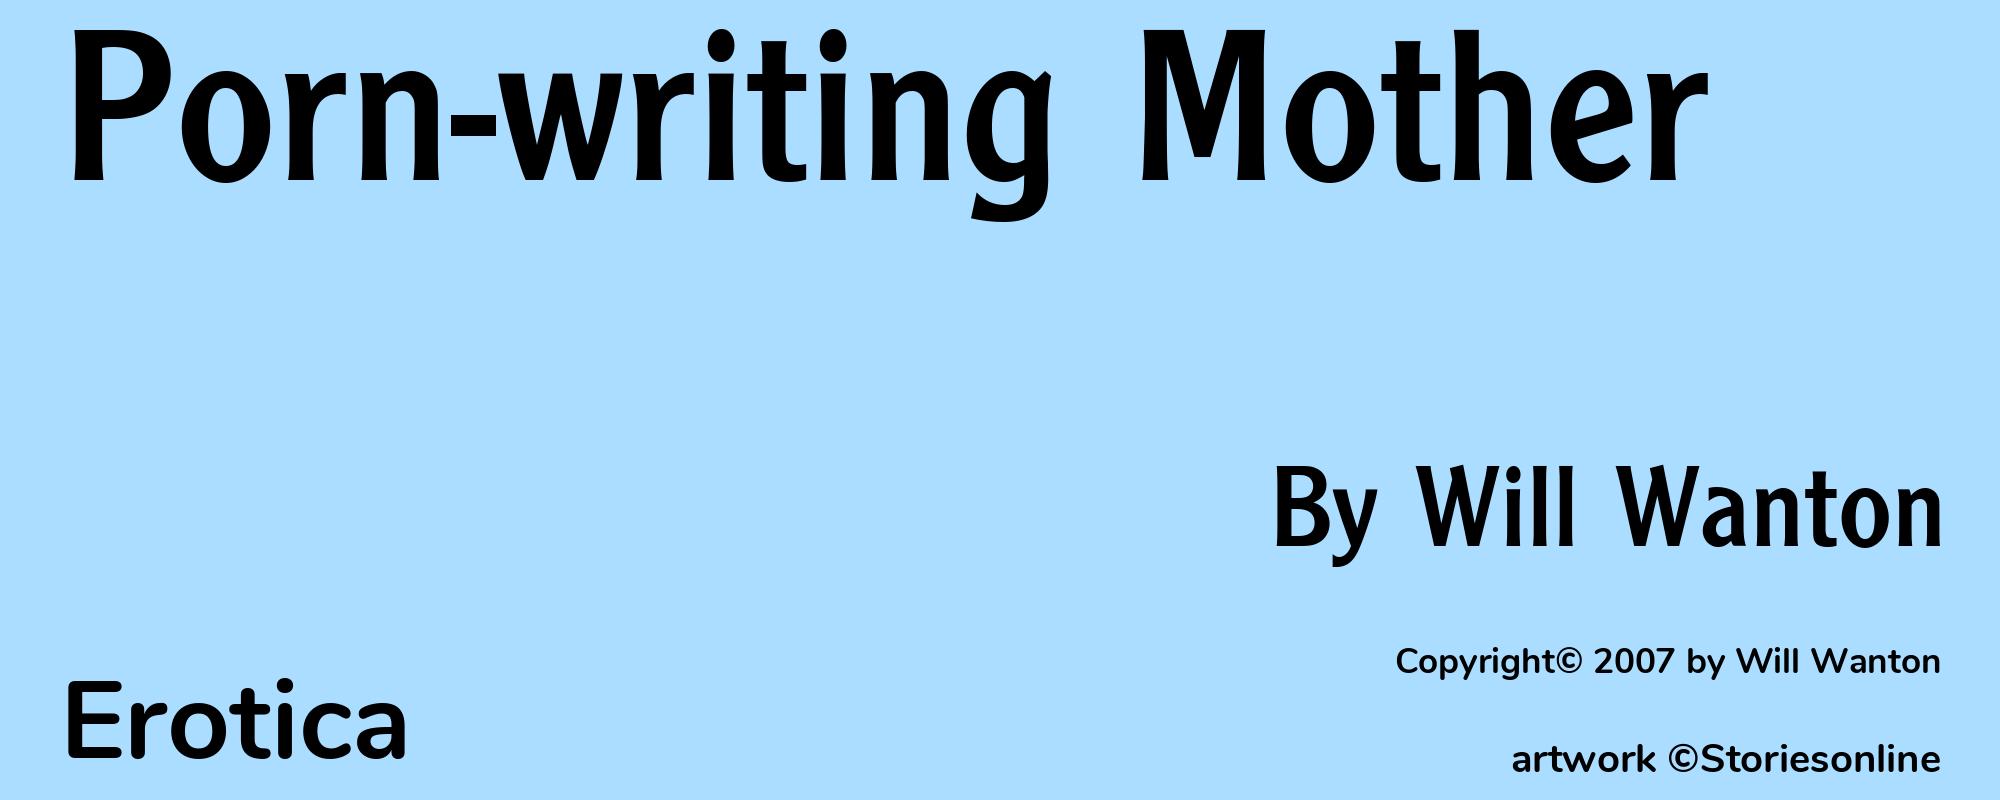 Porn-writing Mother - Cover